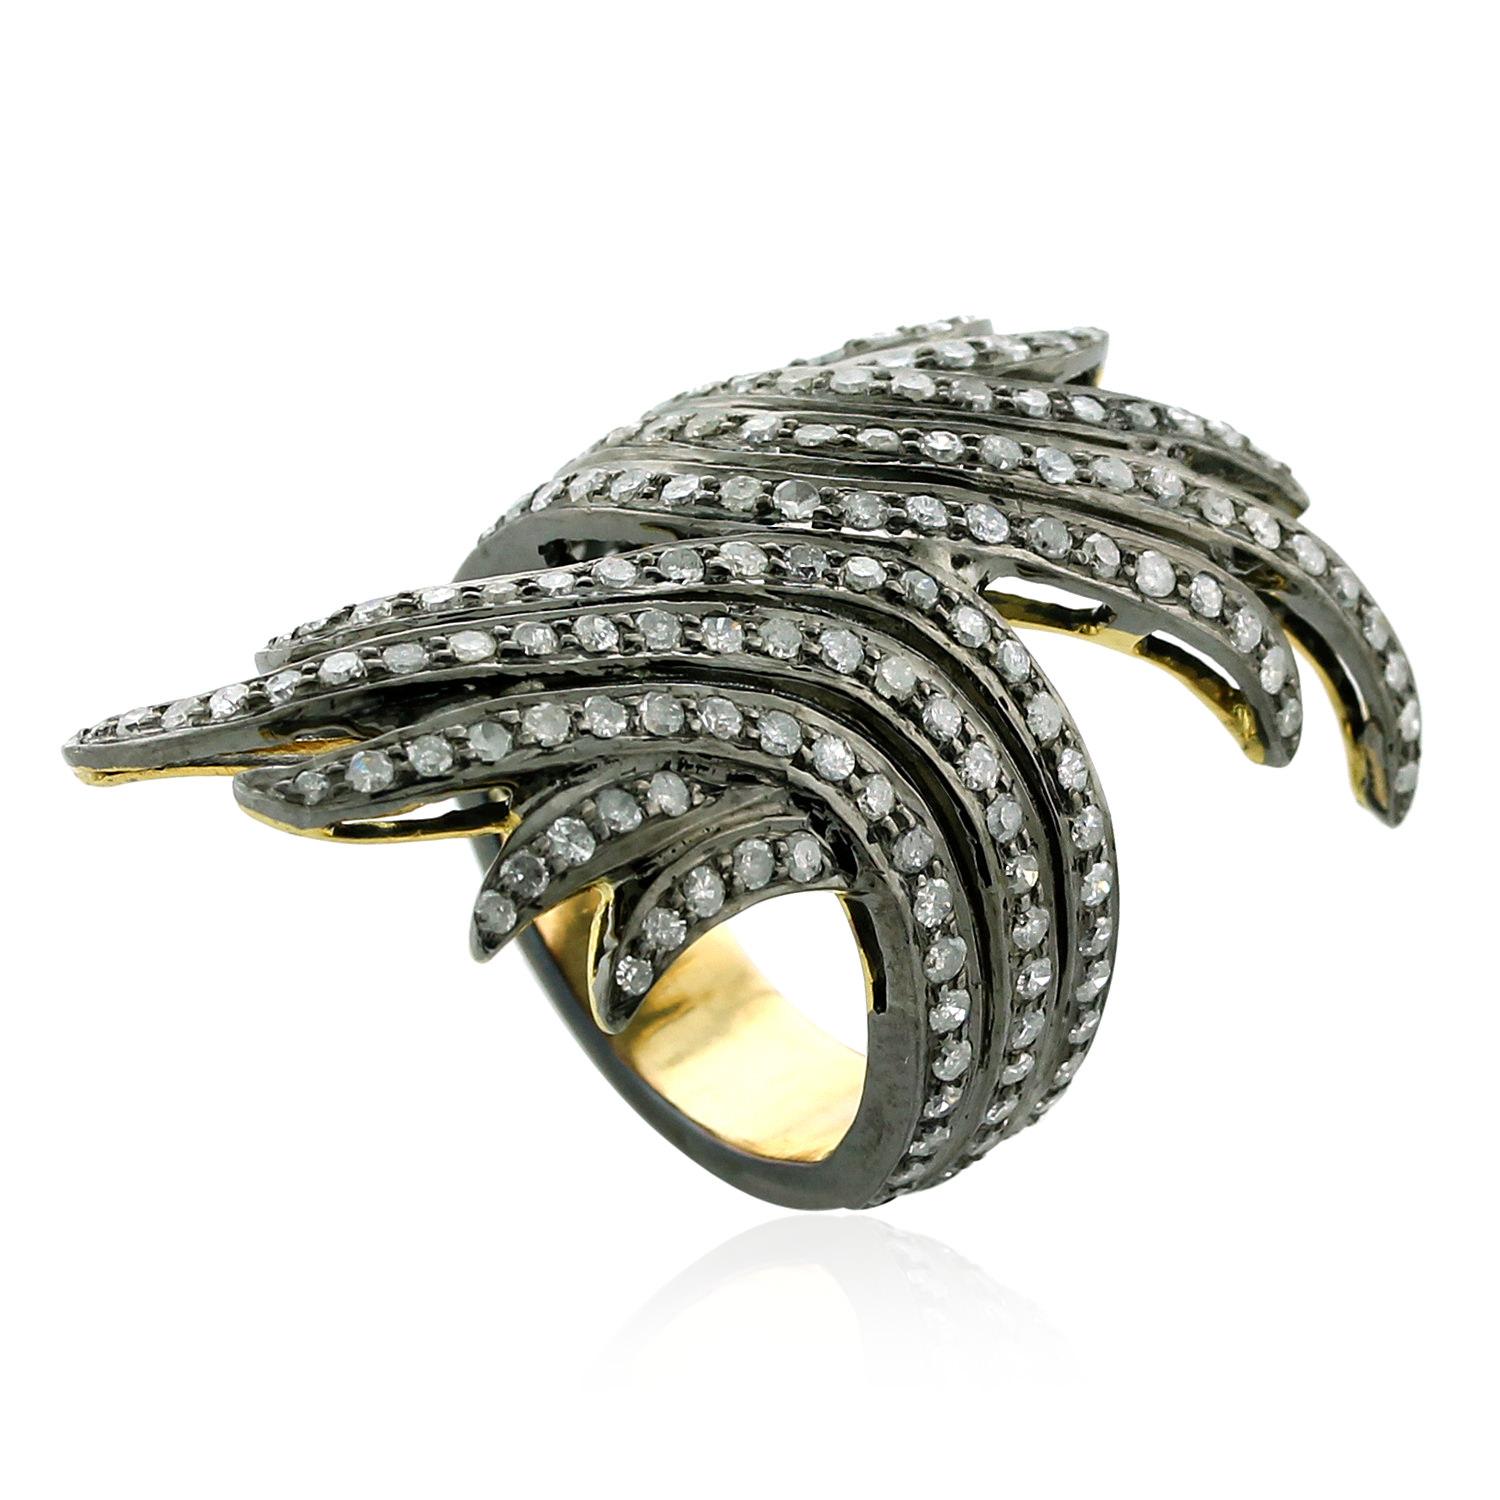 Art Nouveau Pave Diamond Feather Long Ring Made In 18k Yellow Gold & Silver For Sale